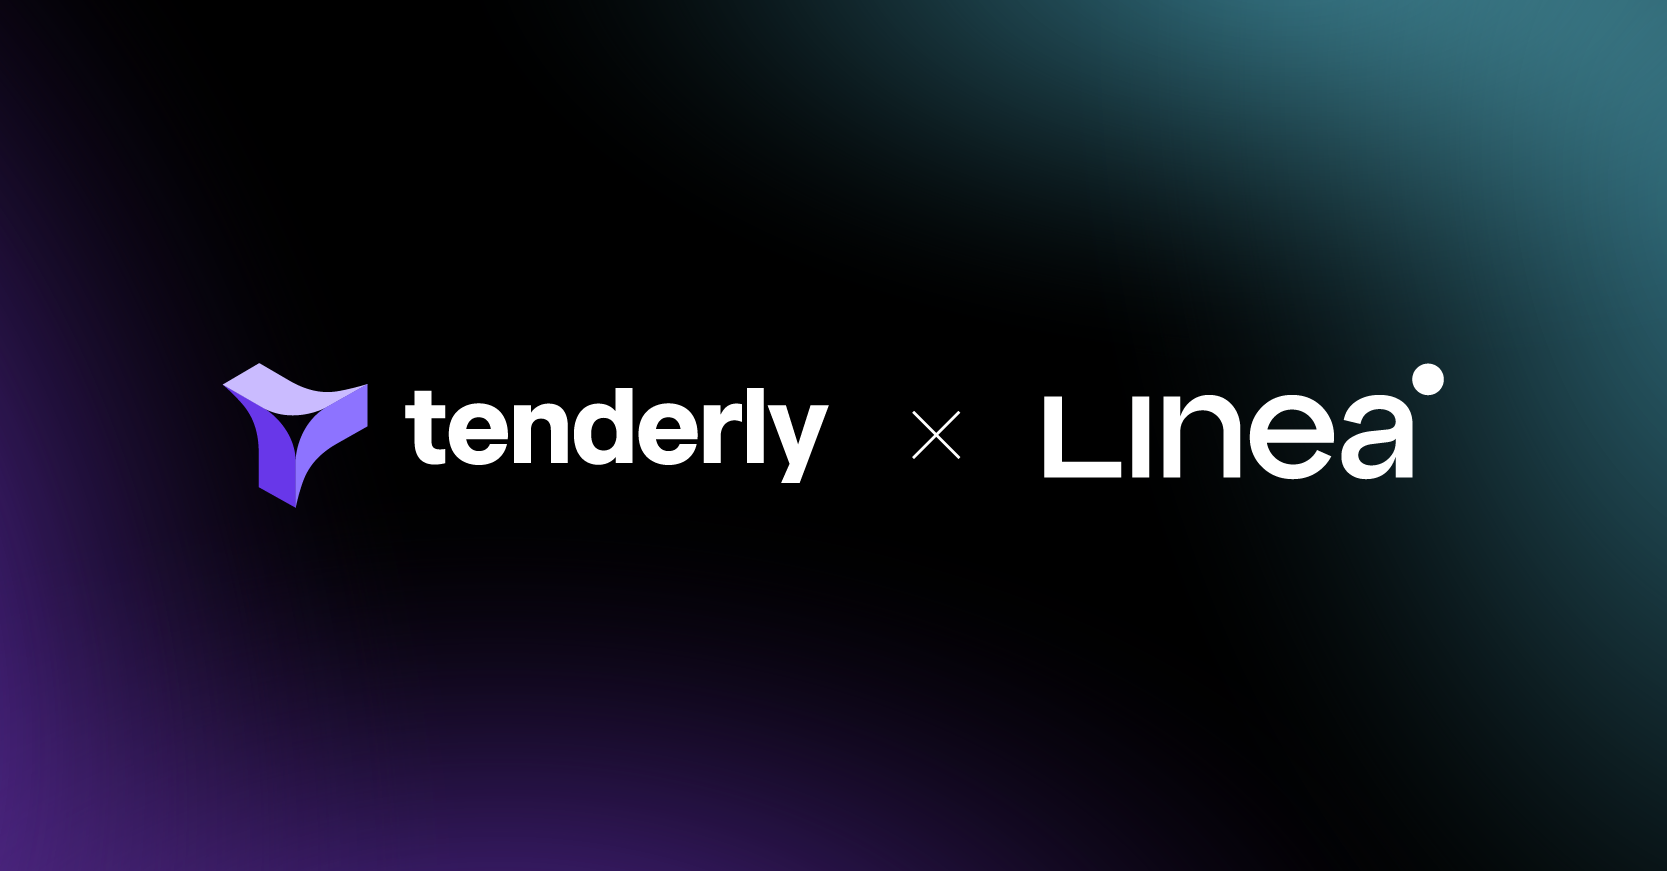 Tenderly Supports the Linea Network